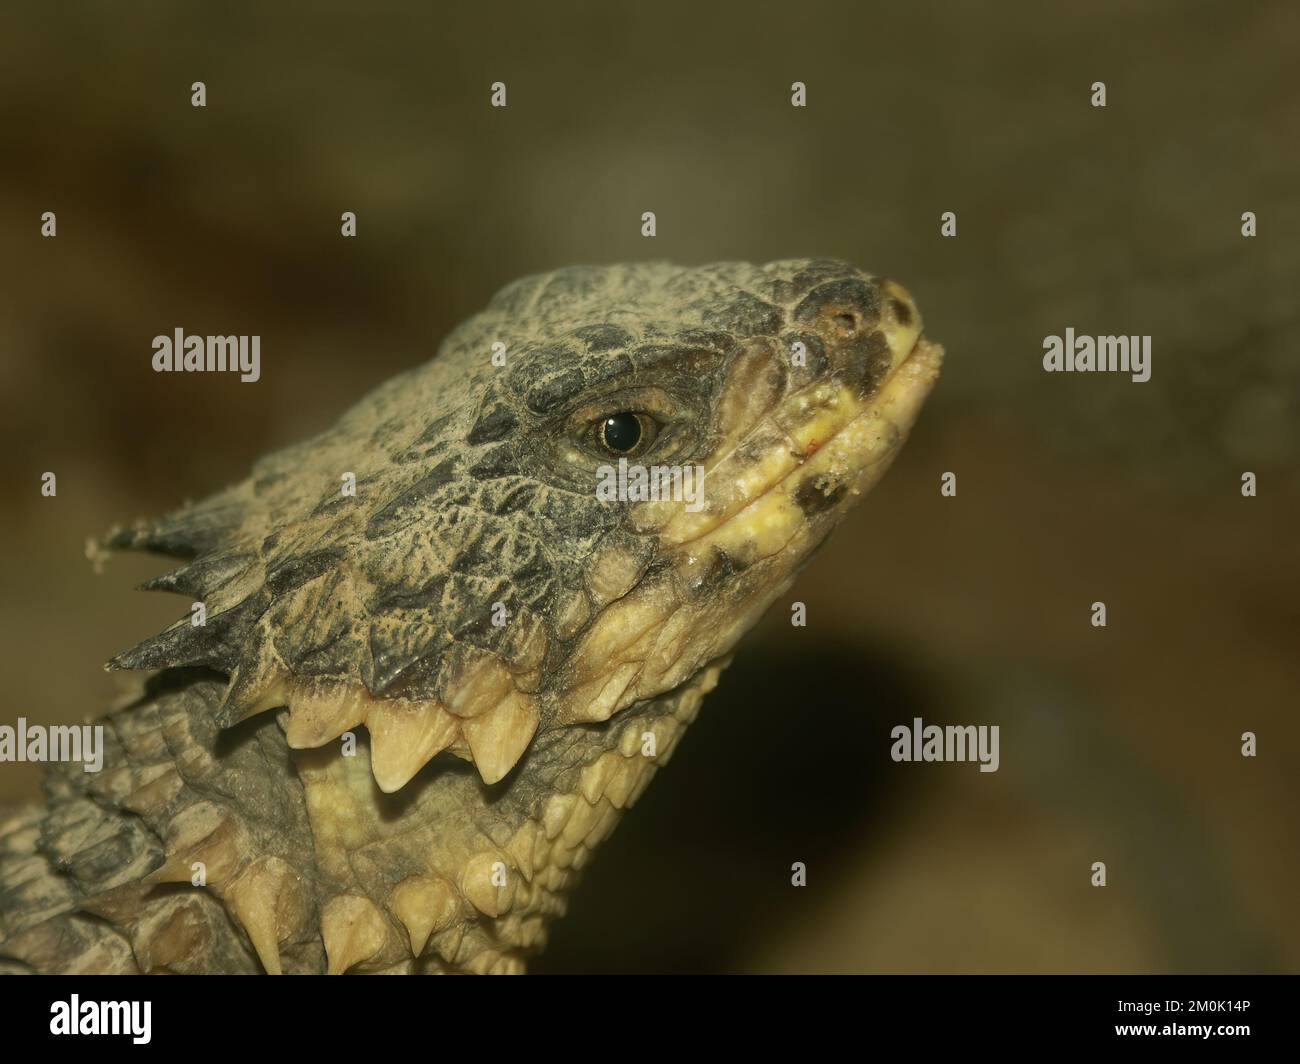 A closeup of a giant girdled lizard with cute little eyes on a blurred background in the wilderness Stock Photo